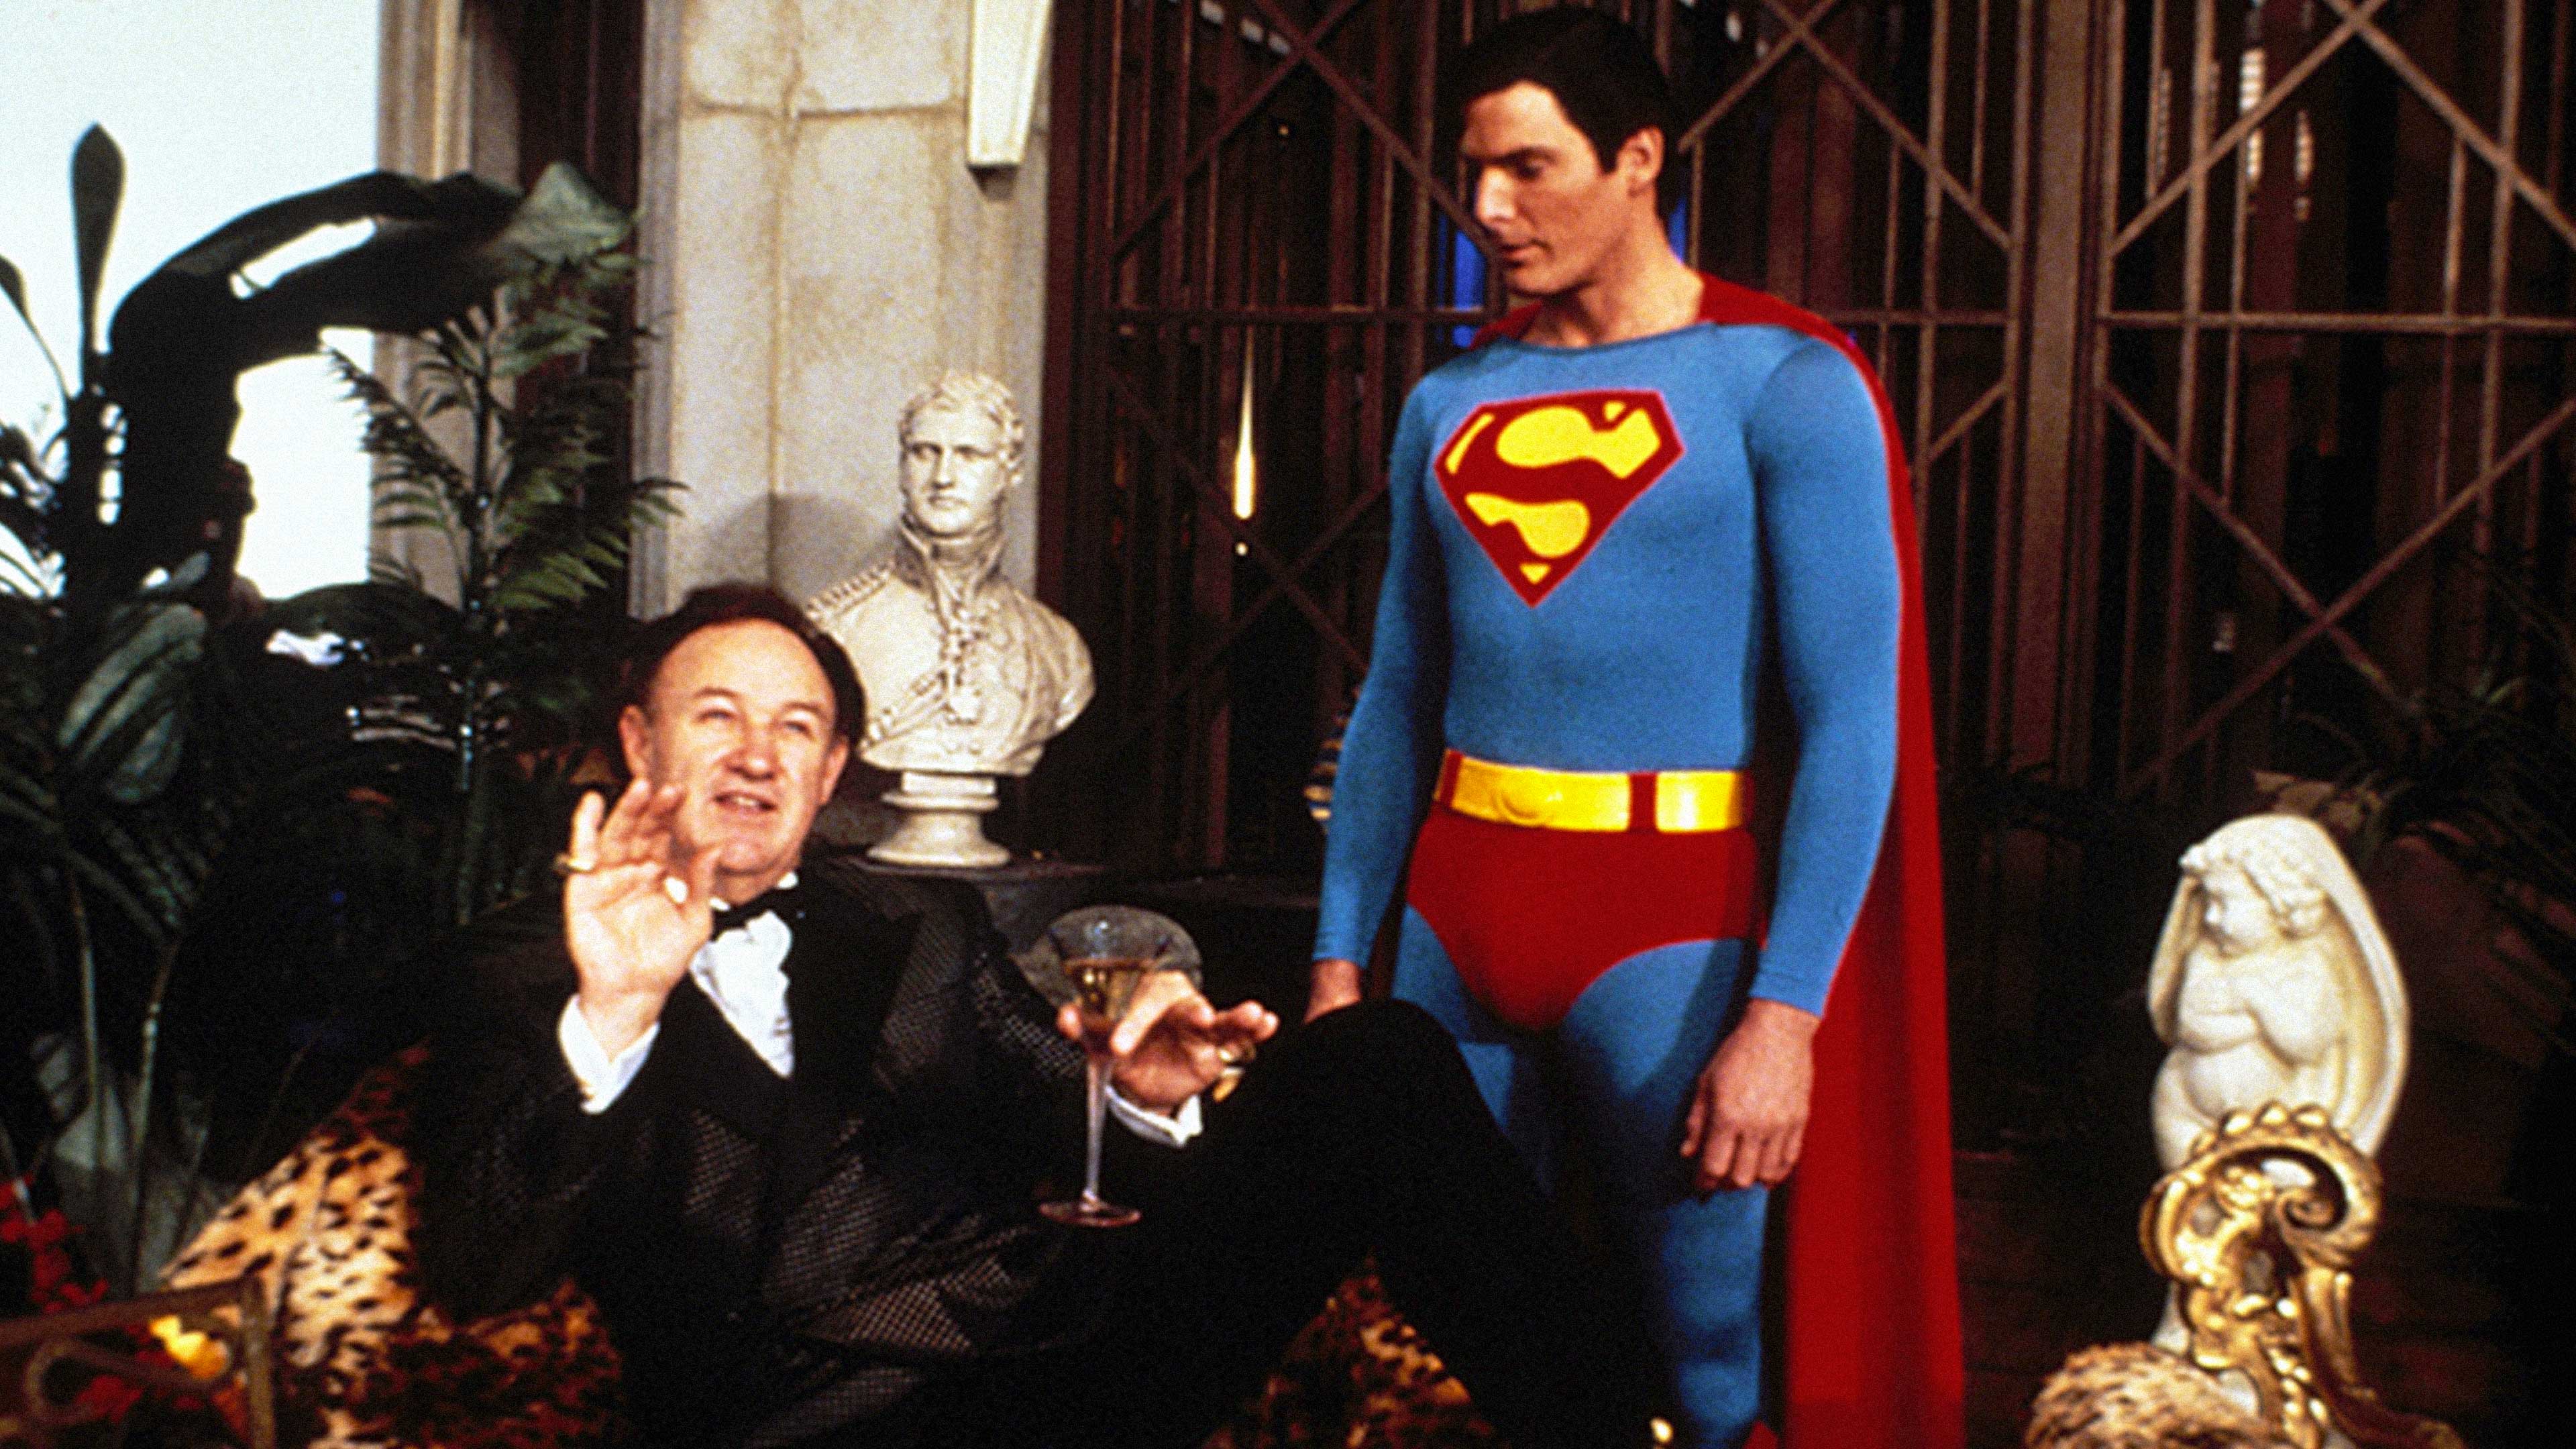 What's New 10/1: SUPERMAN Movies, DOOMSDAY CLOCK #7 & More!3840 x 2160